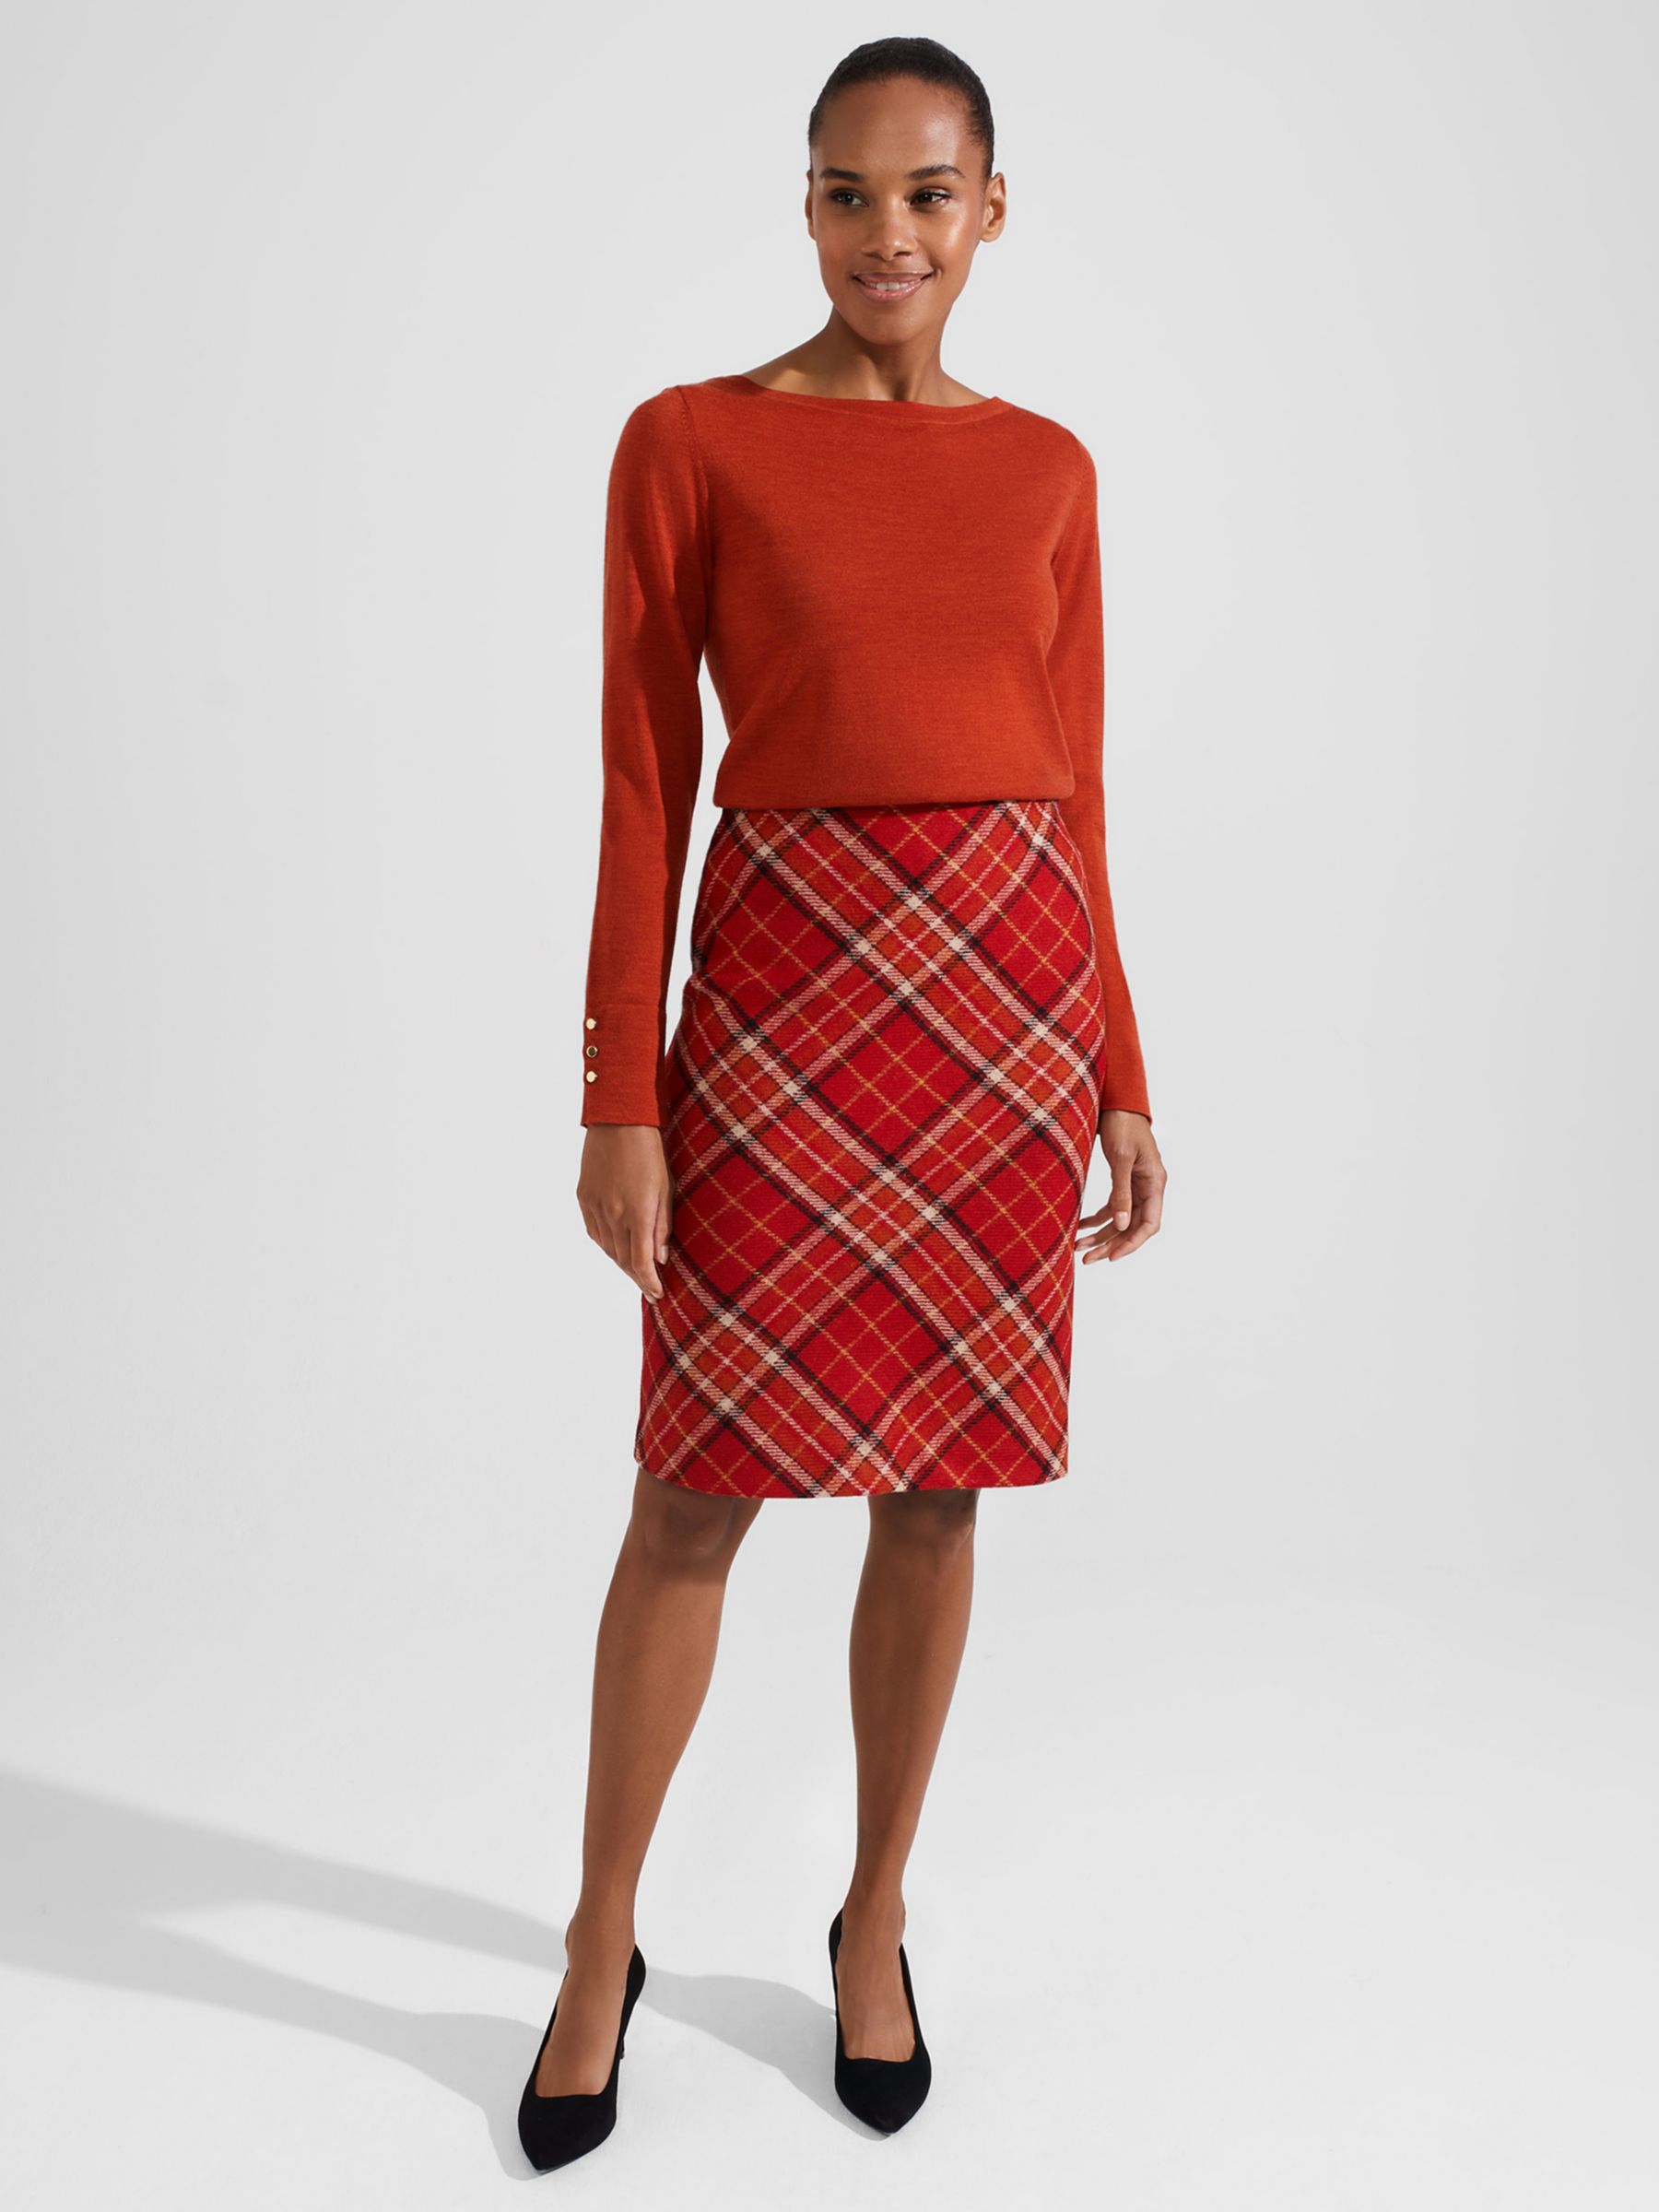 Hobbs Audrey Cashmere and Wool Jumper, Pink Marl at John Lewis & Partners